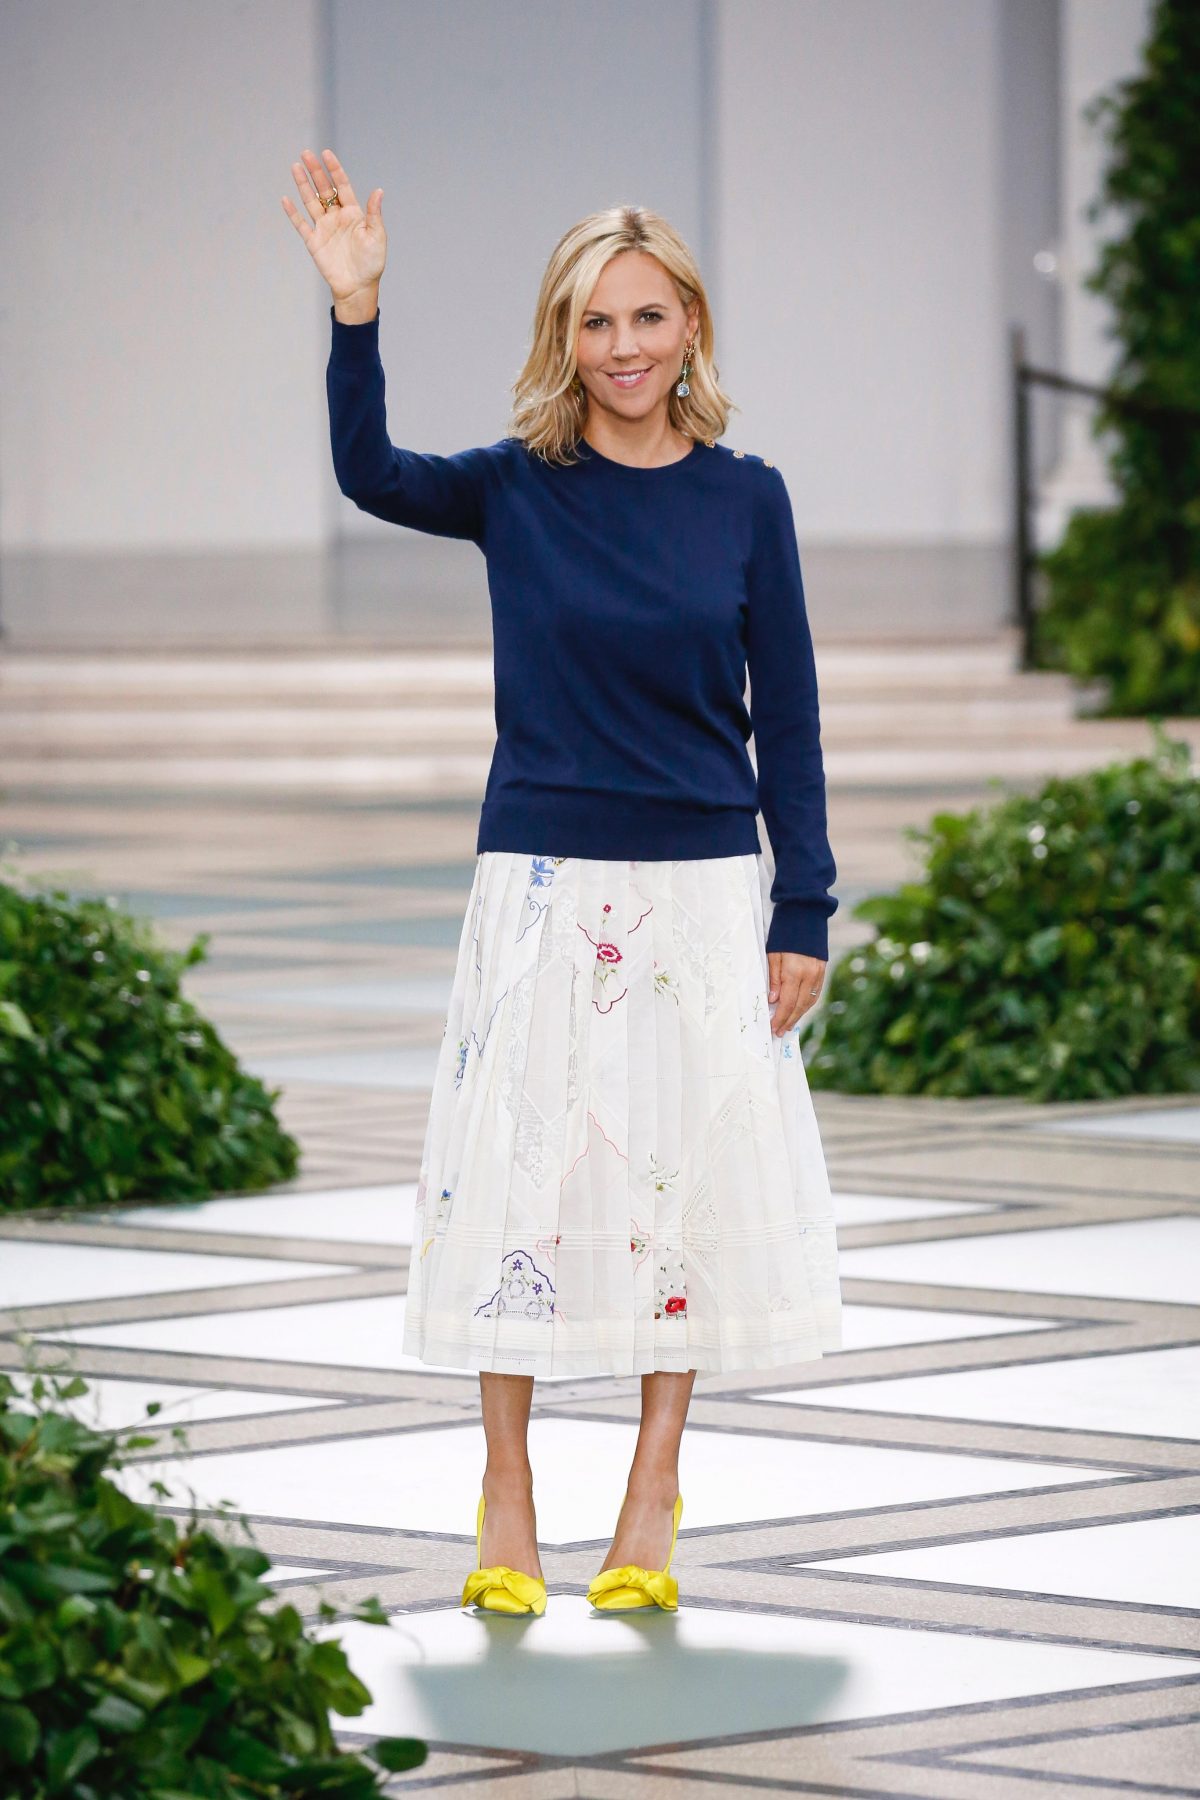 Tory Burch Spring/Summer 2020 Ready-To-Wear Runway Show Review